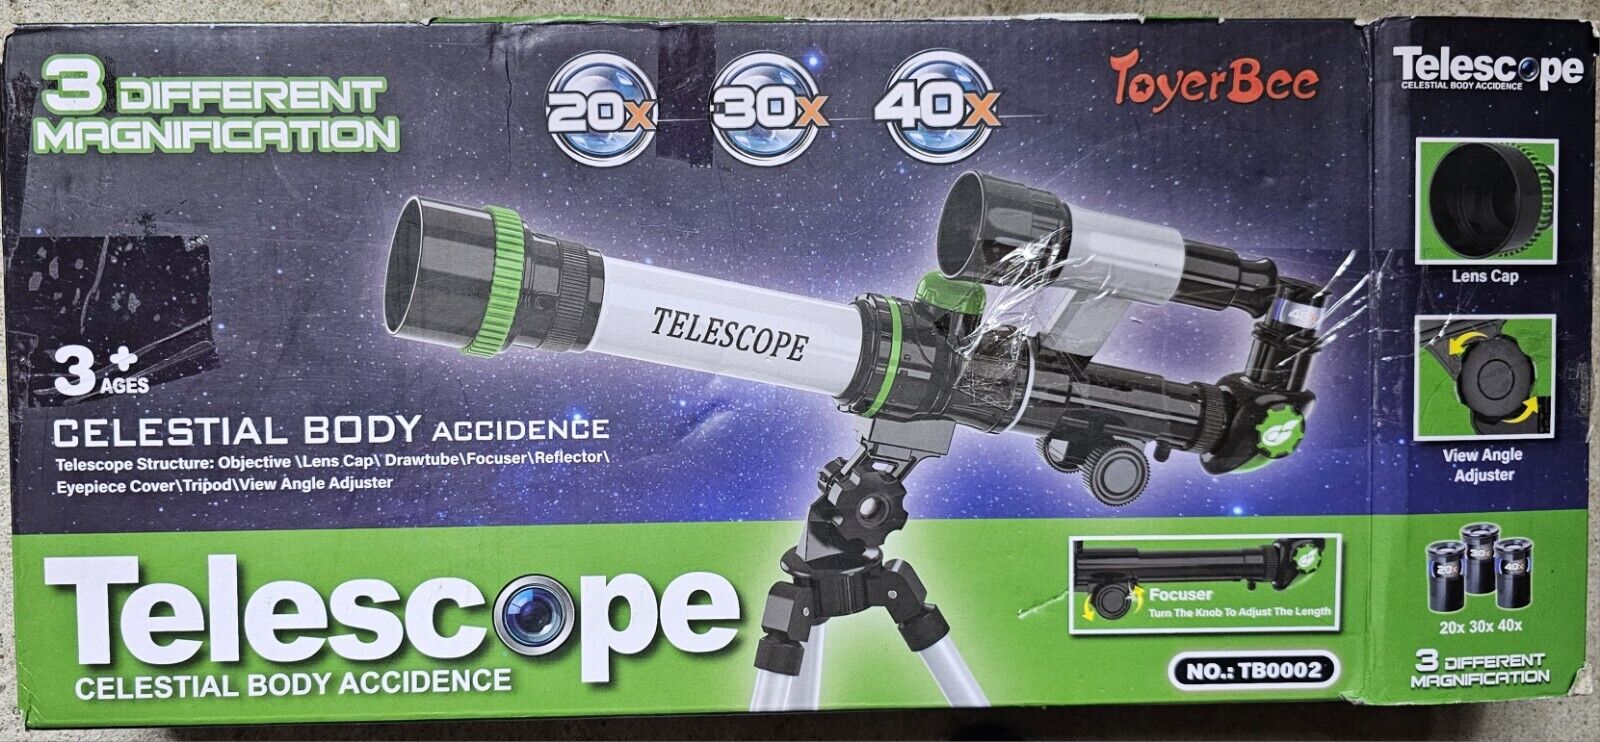 ToyerBee Telescope for Adults & Kids, 70mm Aperture Astronomical Refractor